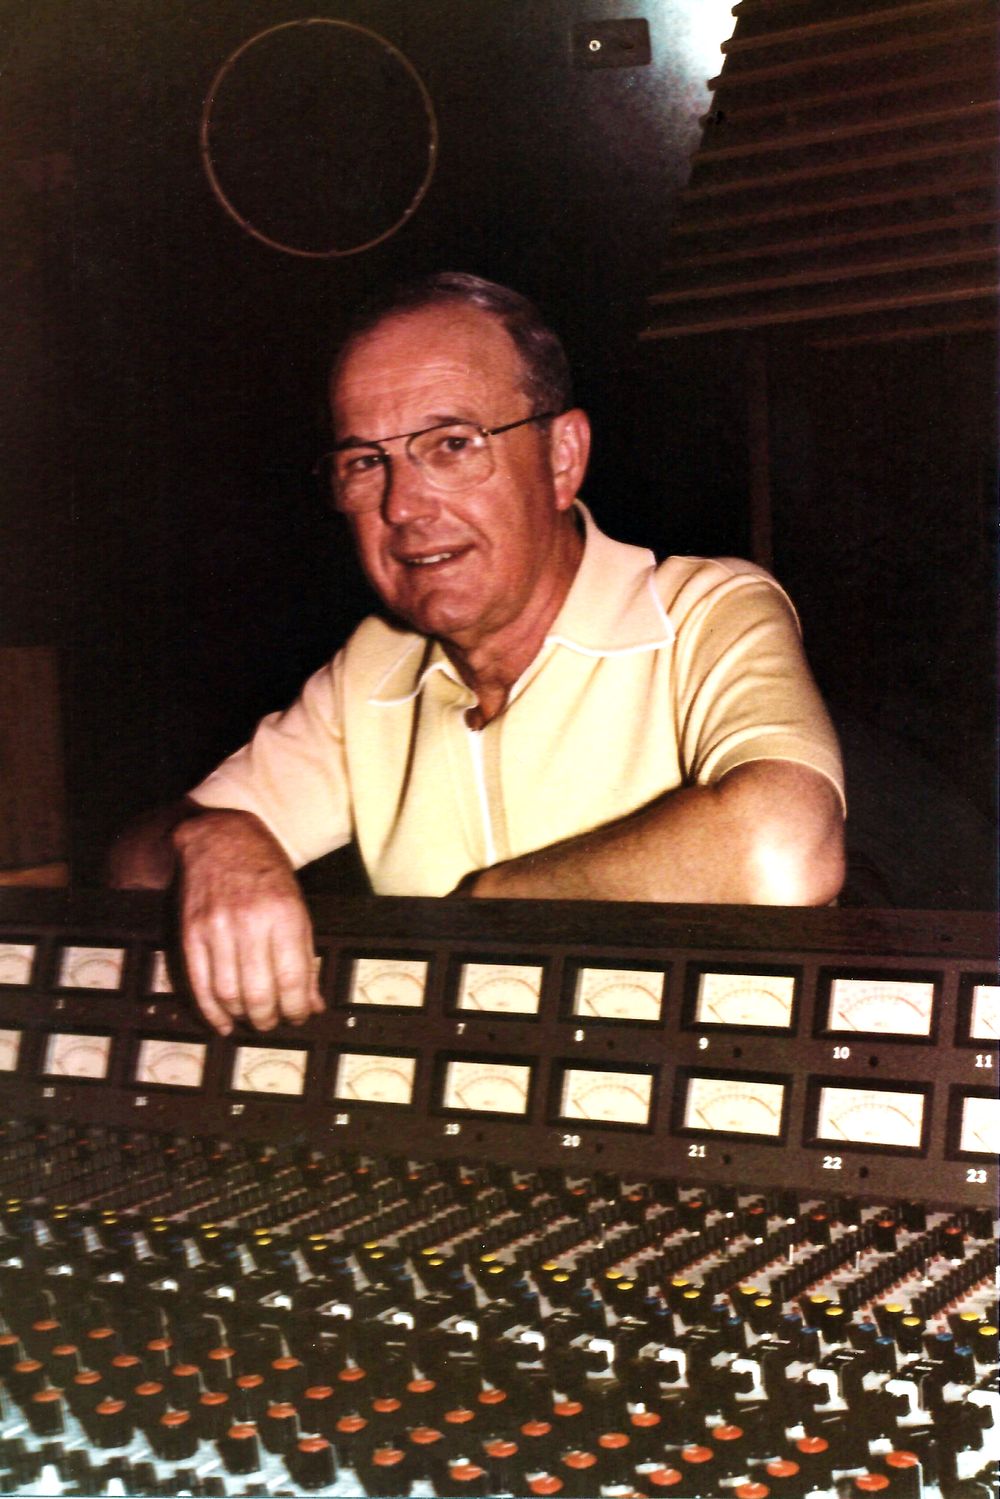 Norman Petty, producer and manager of Buddy Holly & The Crickets, November 1980